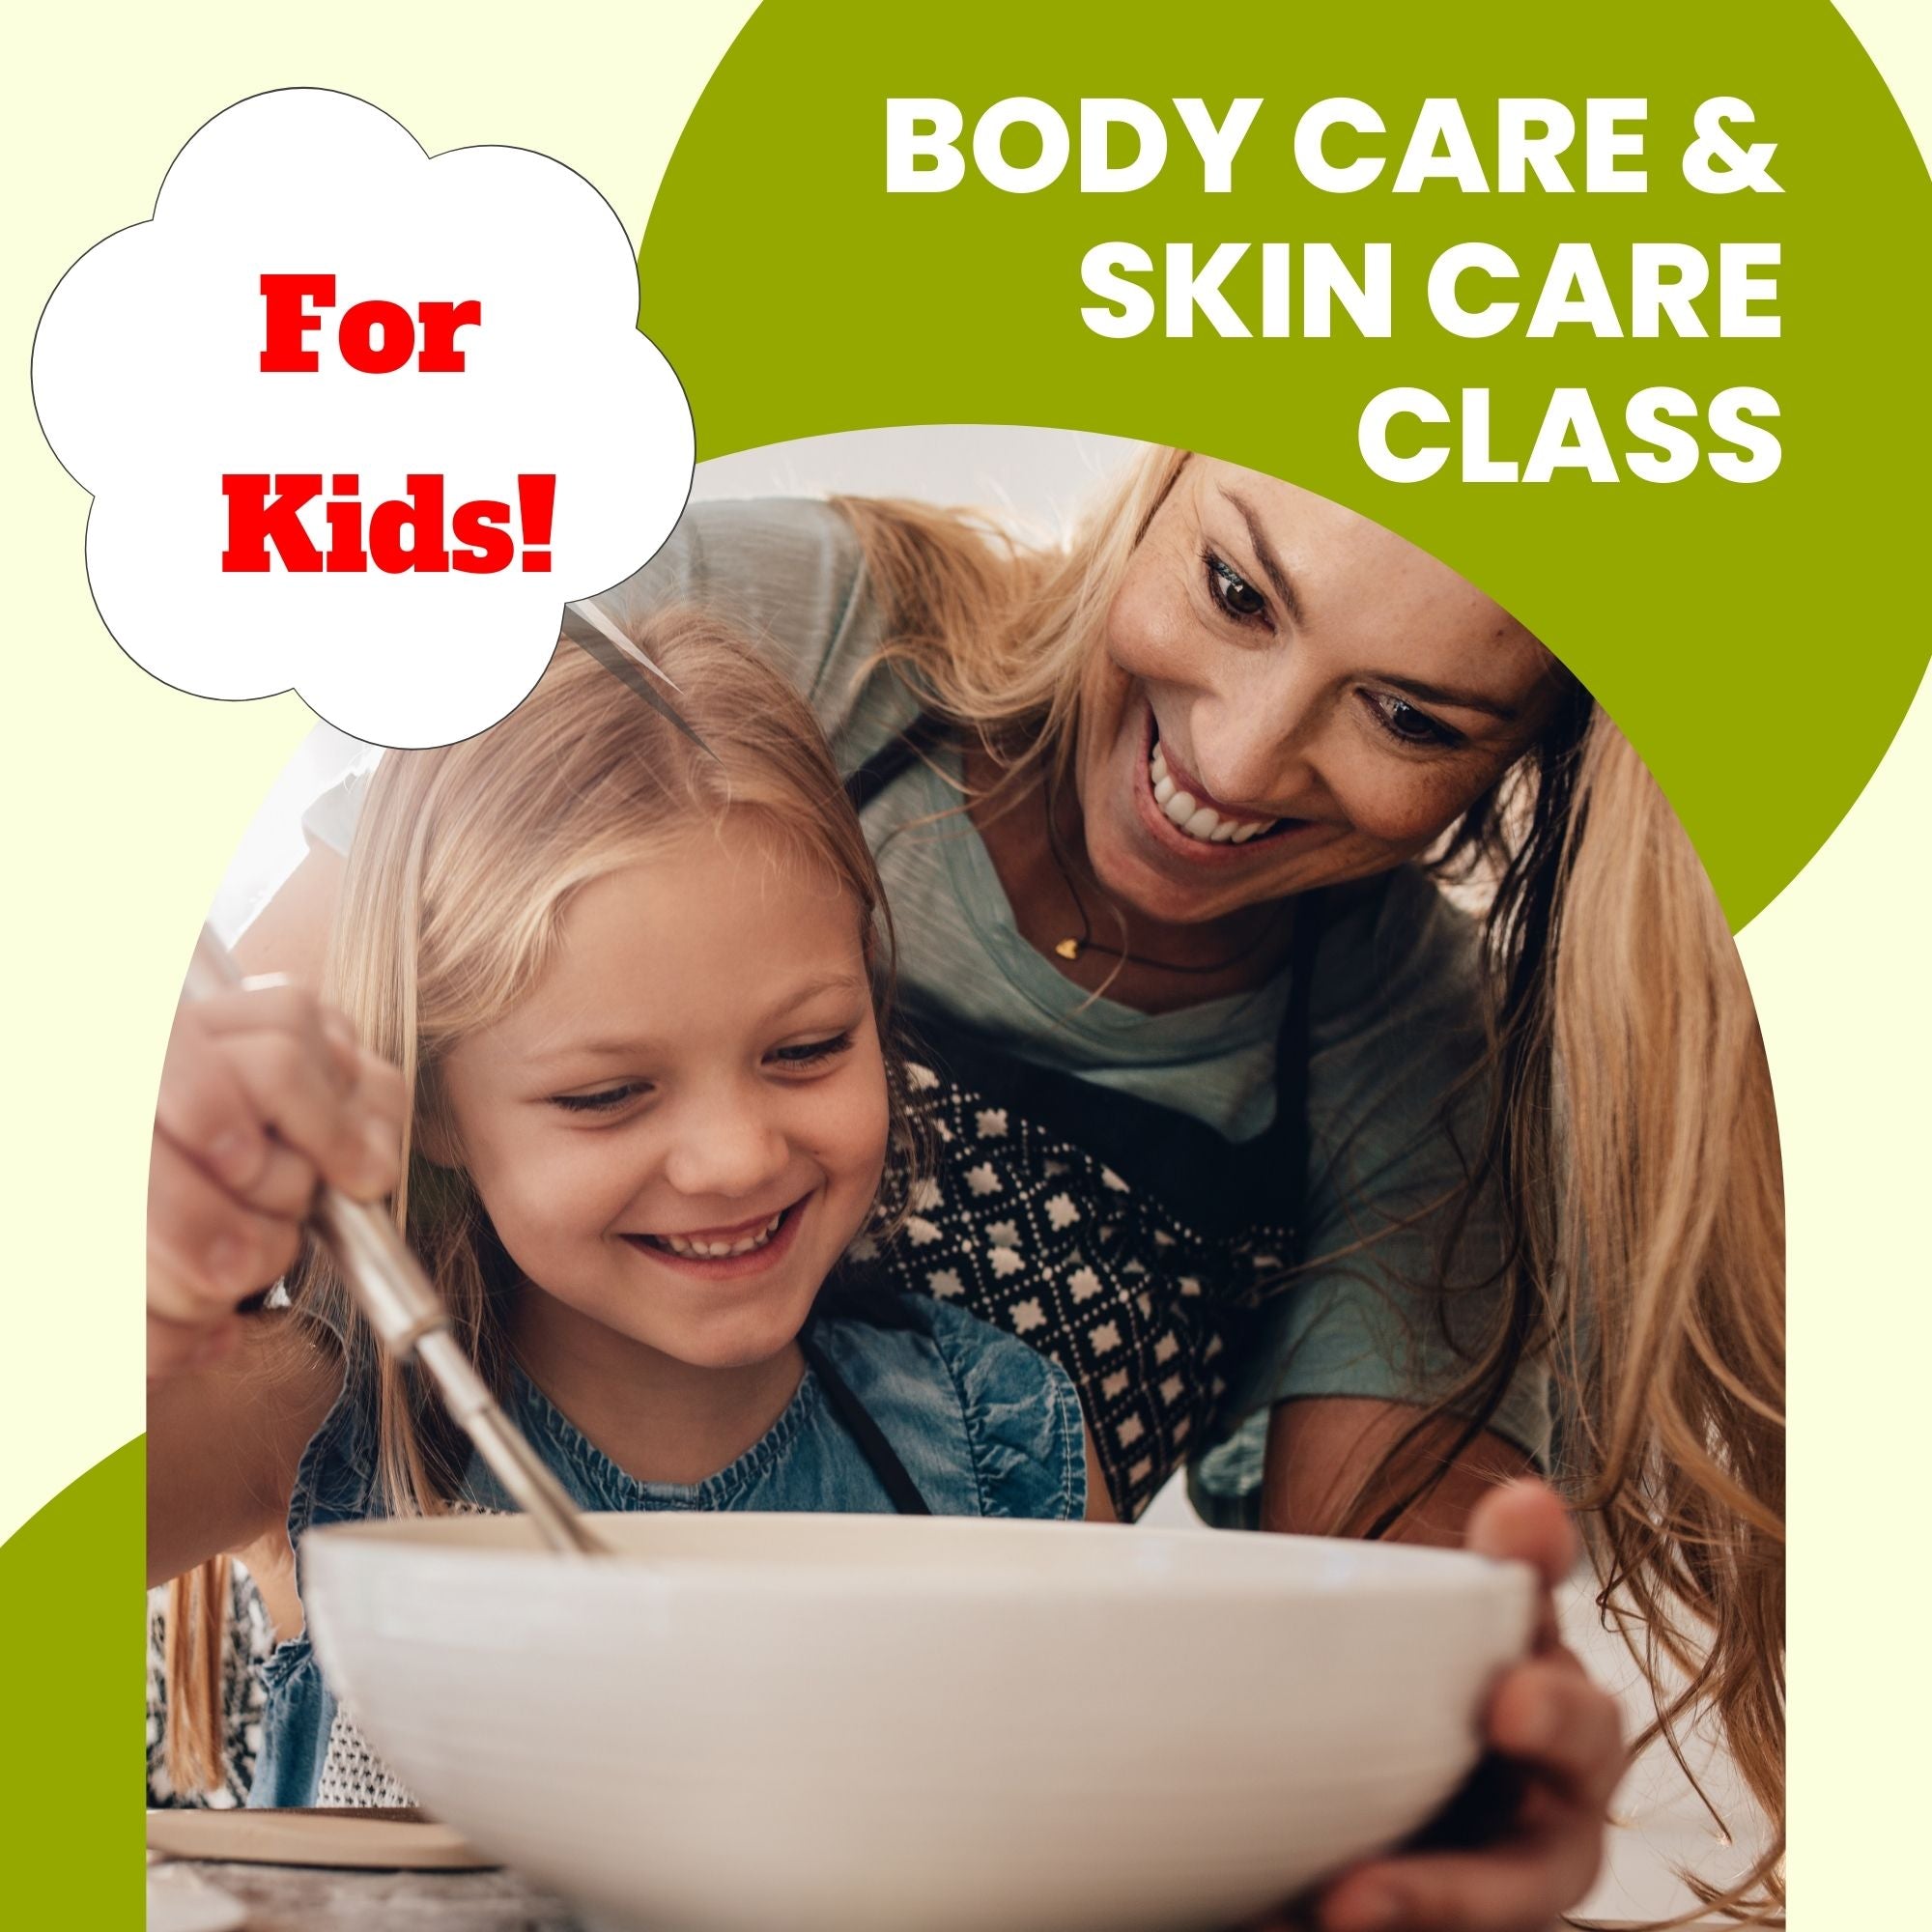 Skin Care & Body Care Crafting Class - For Kids!